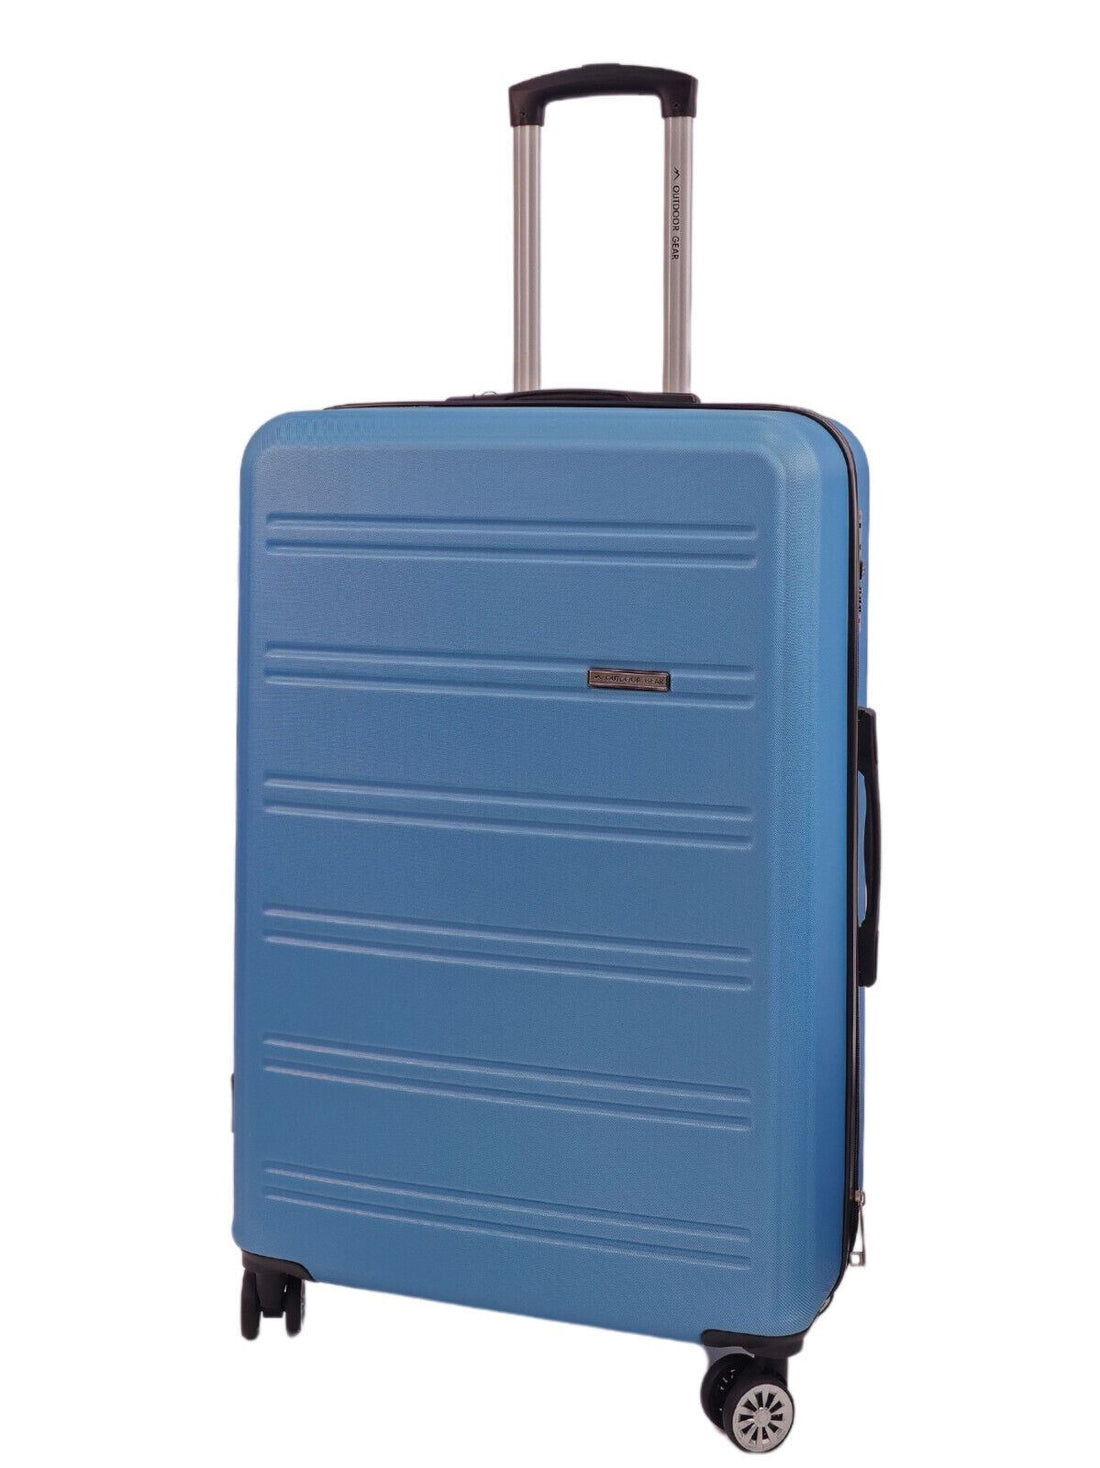 Alabaster Large Hard Shell Suitcase in Blue